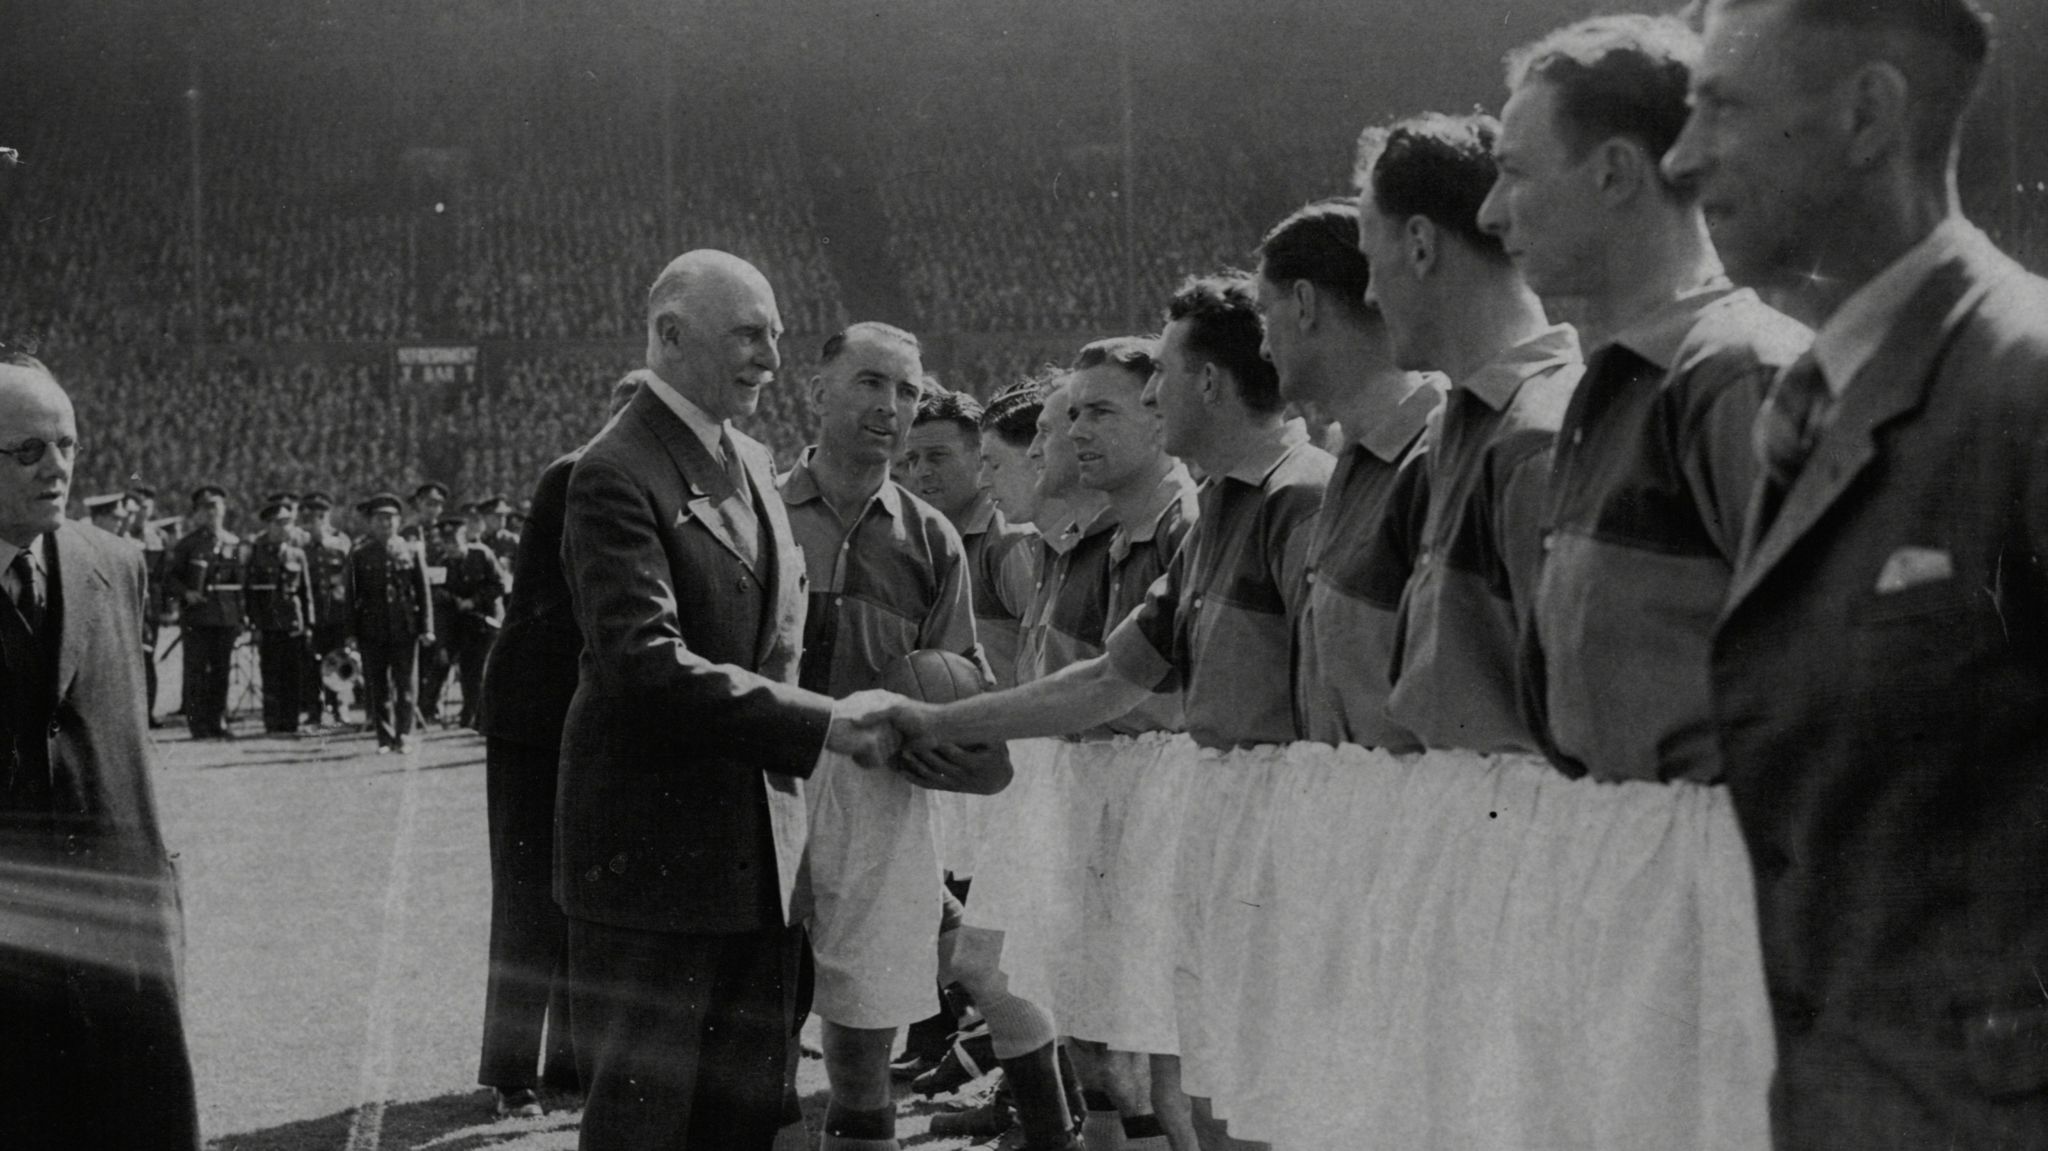 Football Association president The Earl Of Athlone shakes hands with Romford players ahead of the 1949 FA Amateur Cup final at Wembley